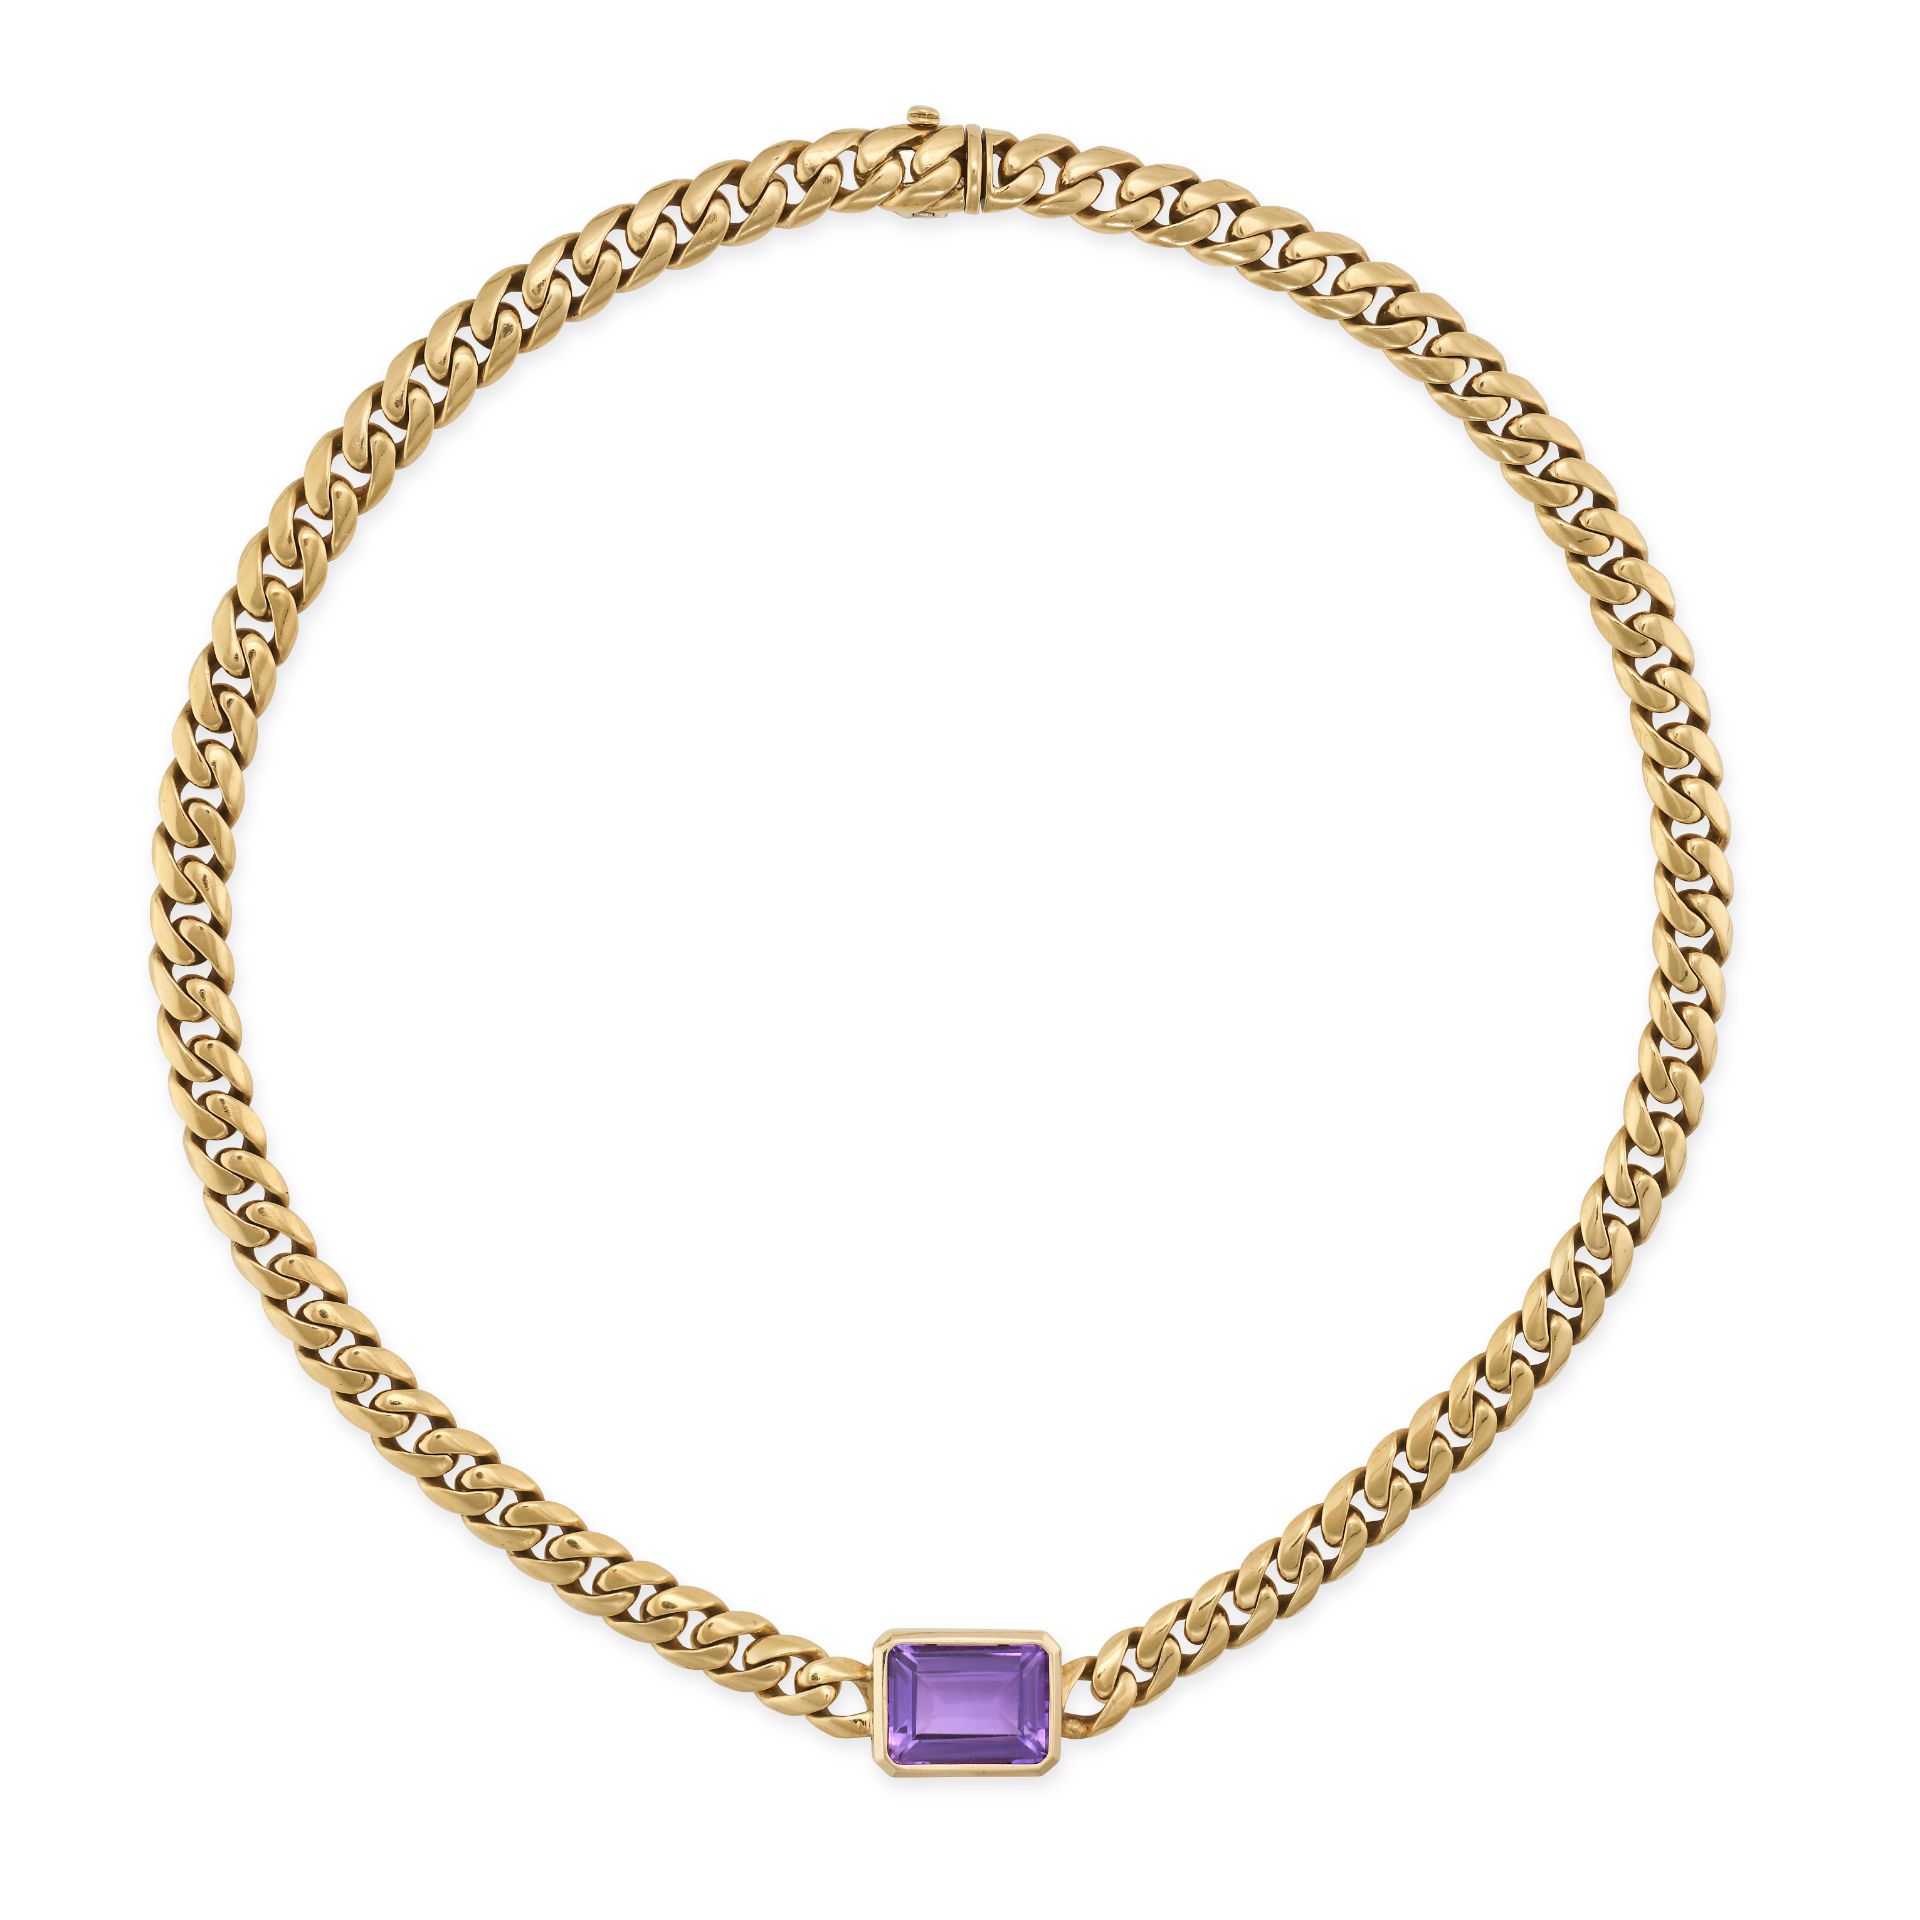 VAN CLEEF & ARPELS, AN AMETHYST CHAIN NECKLACE comprising a curb link chain set with an octagonal... - Image 2 of 2